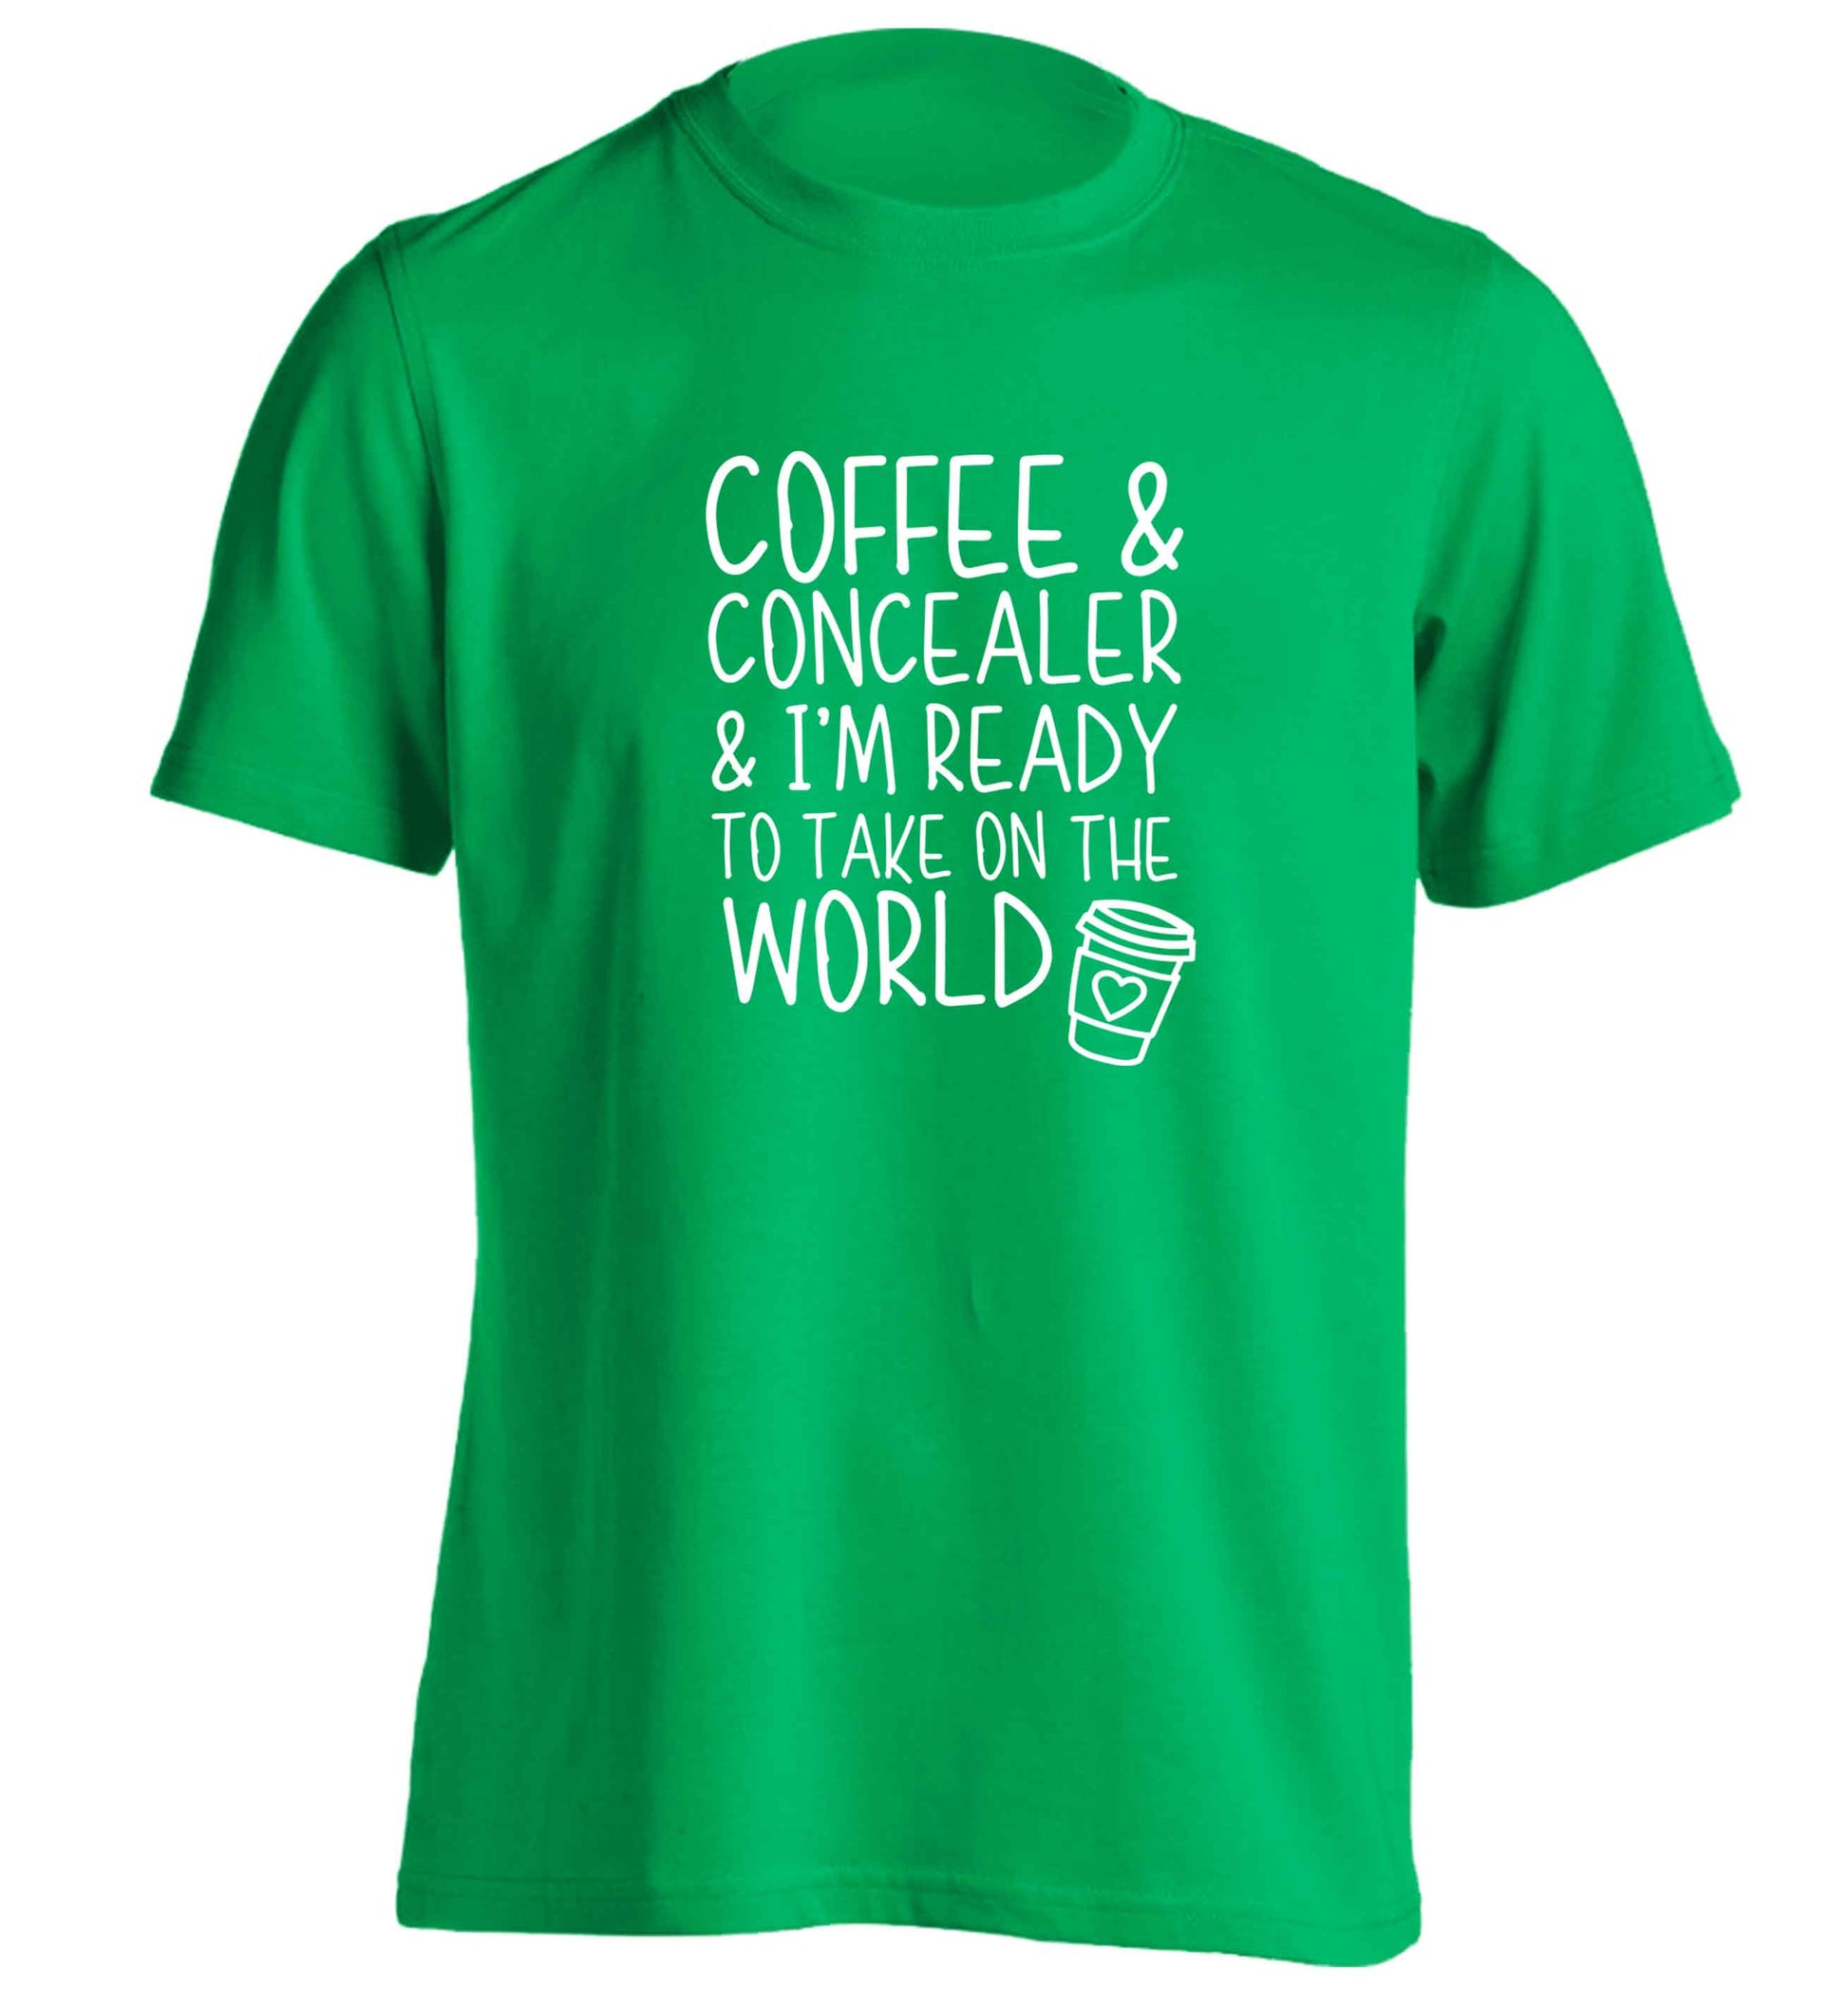 Coffee and concealer and I'm ready to take on the world adults unisex green Tshirt 2XL